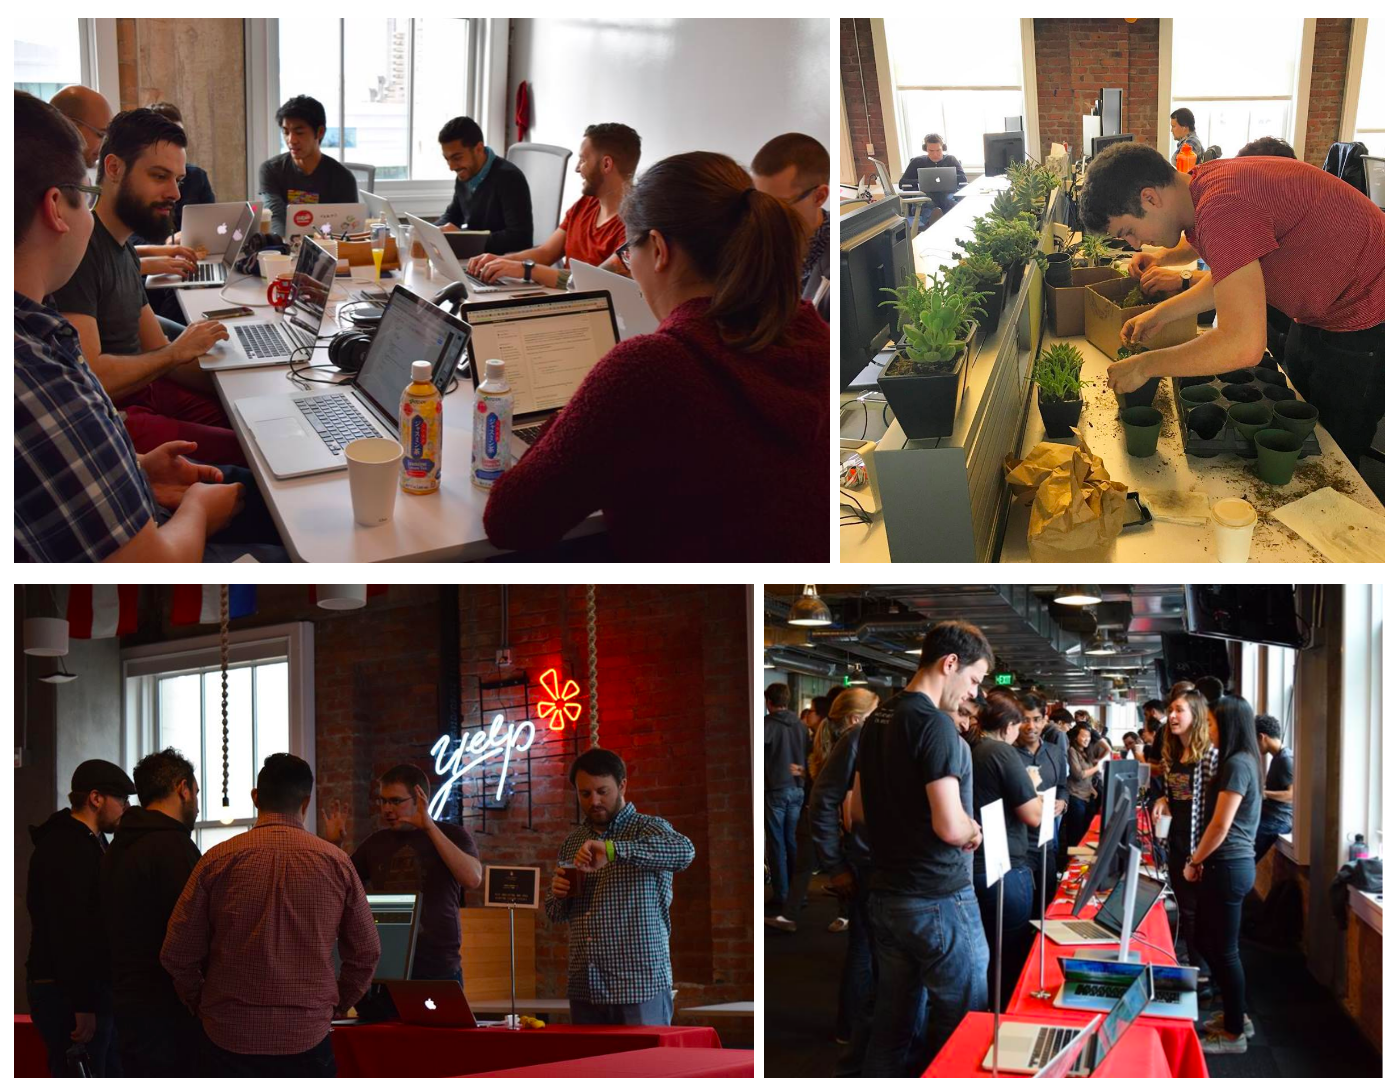 Top row : Hacking - with code and with plants :)
Bottom row : Our engineers demo-ing their hackathon projects at our science-fair style presentation.